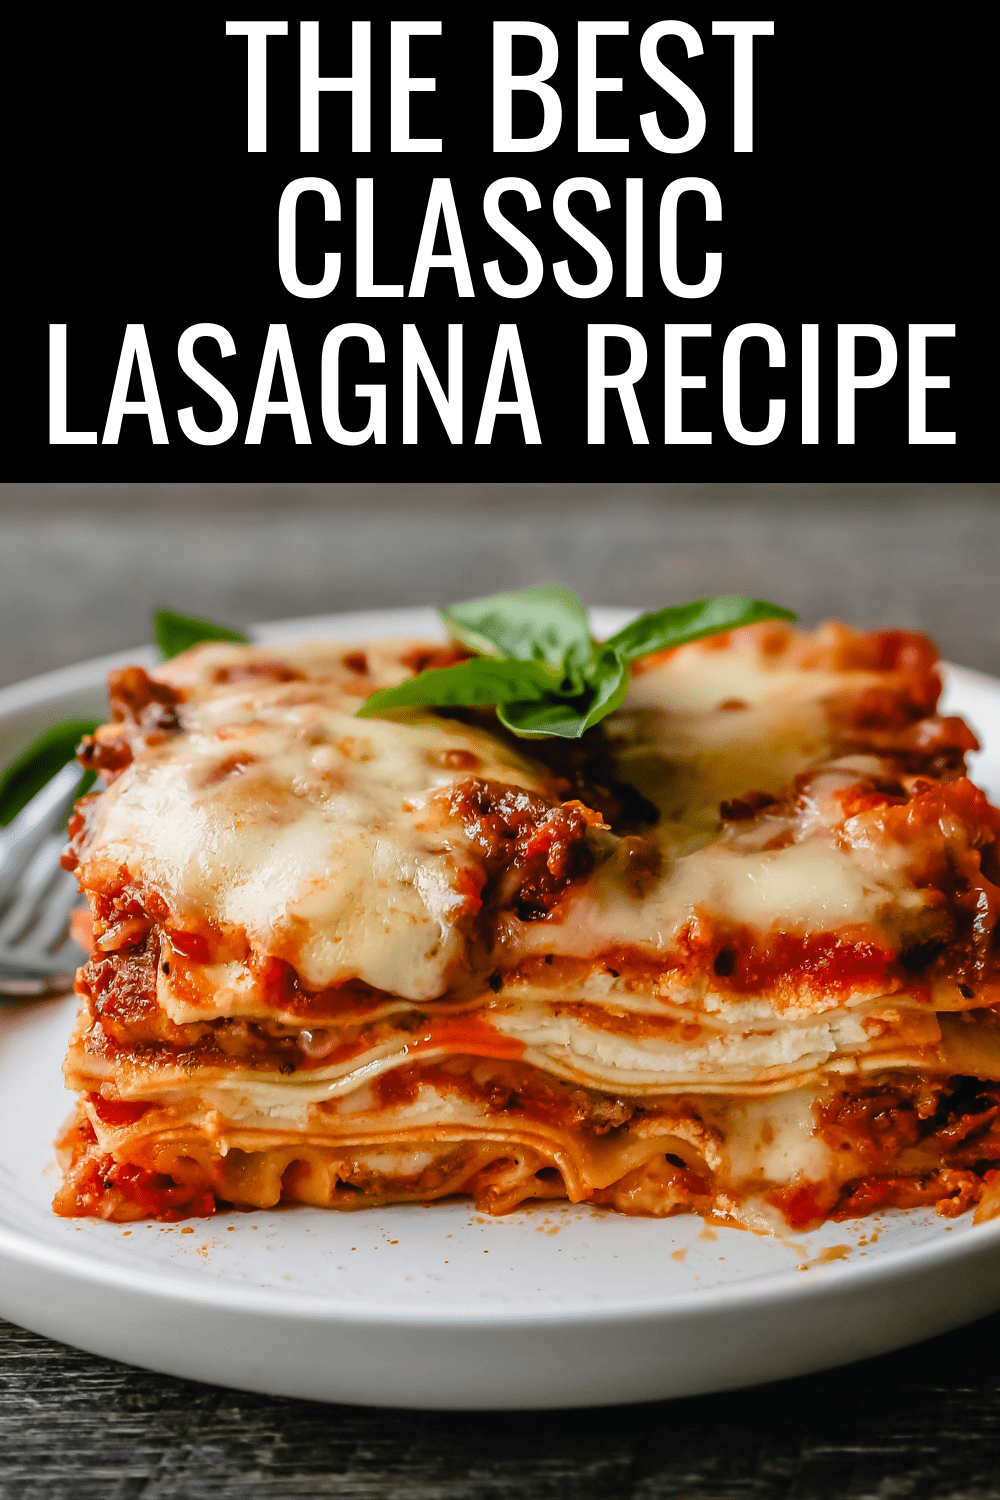 The Best Classic Lasagna Recipe. The perfect lasagna recipe made with parmesan ricotta cheese filling, melted mozzarella cheese, lasagna noodles, and a robust tomato meat sauce. It is the best lasagna recipe!